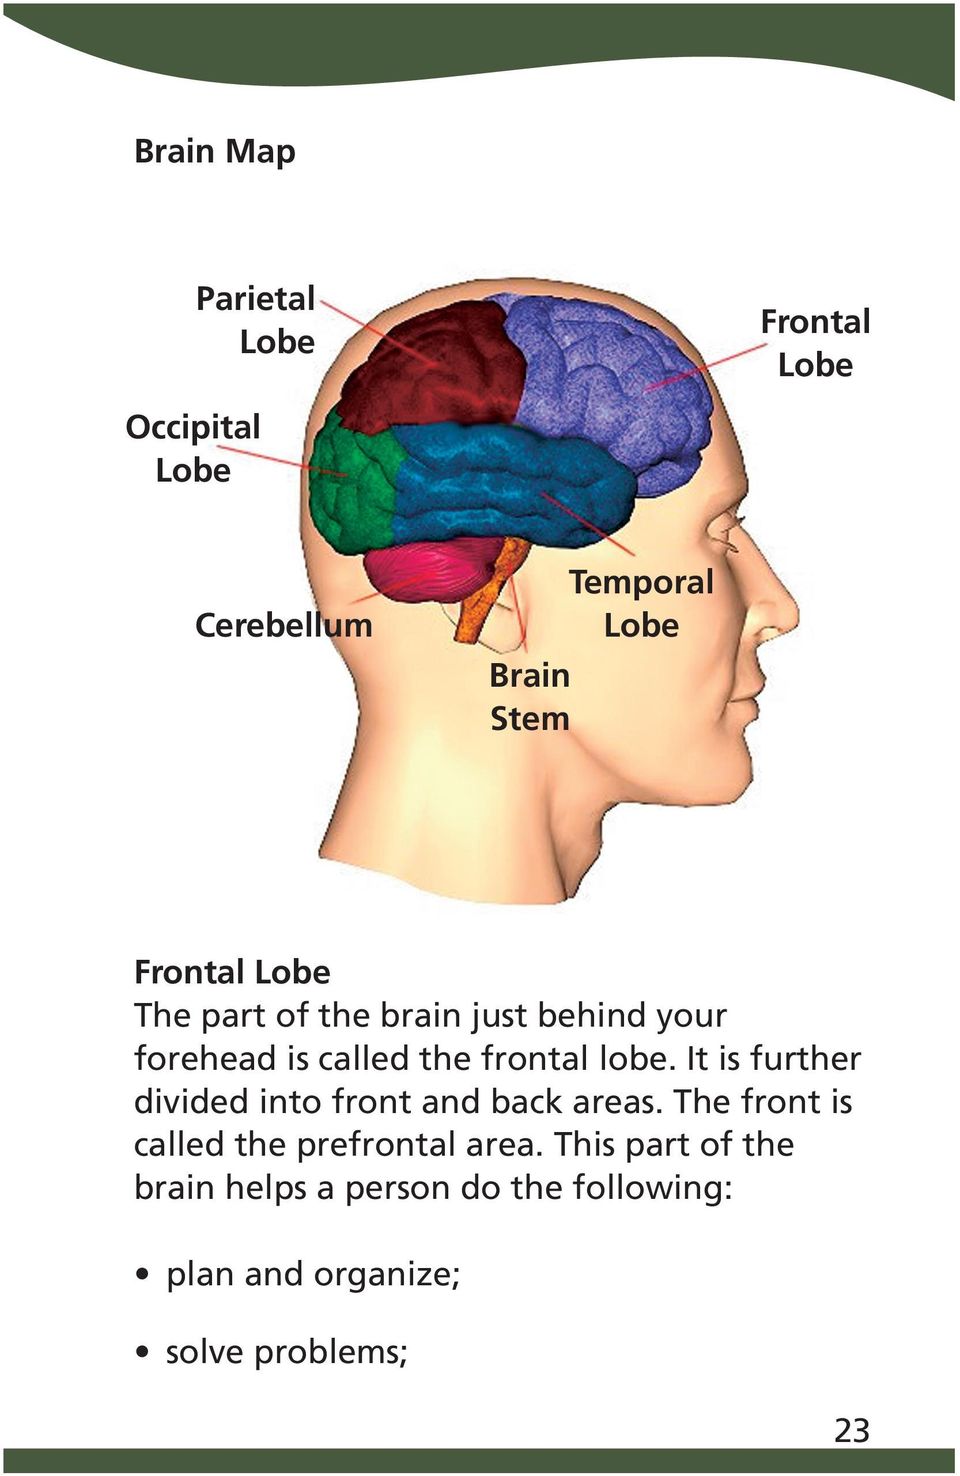 It is further divided into front and back areas. The front is called the prefrontal area.